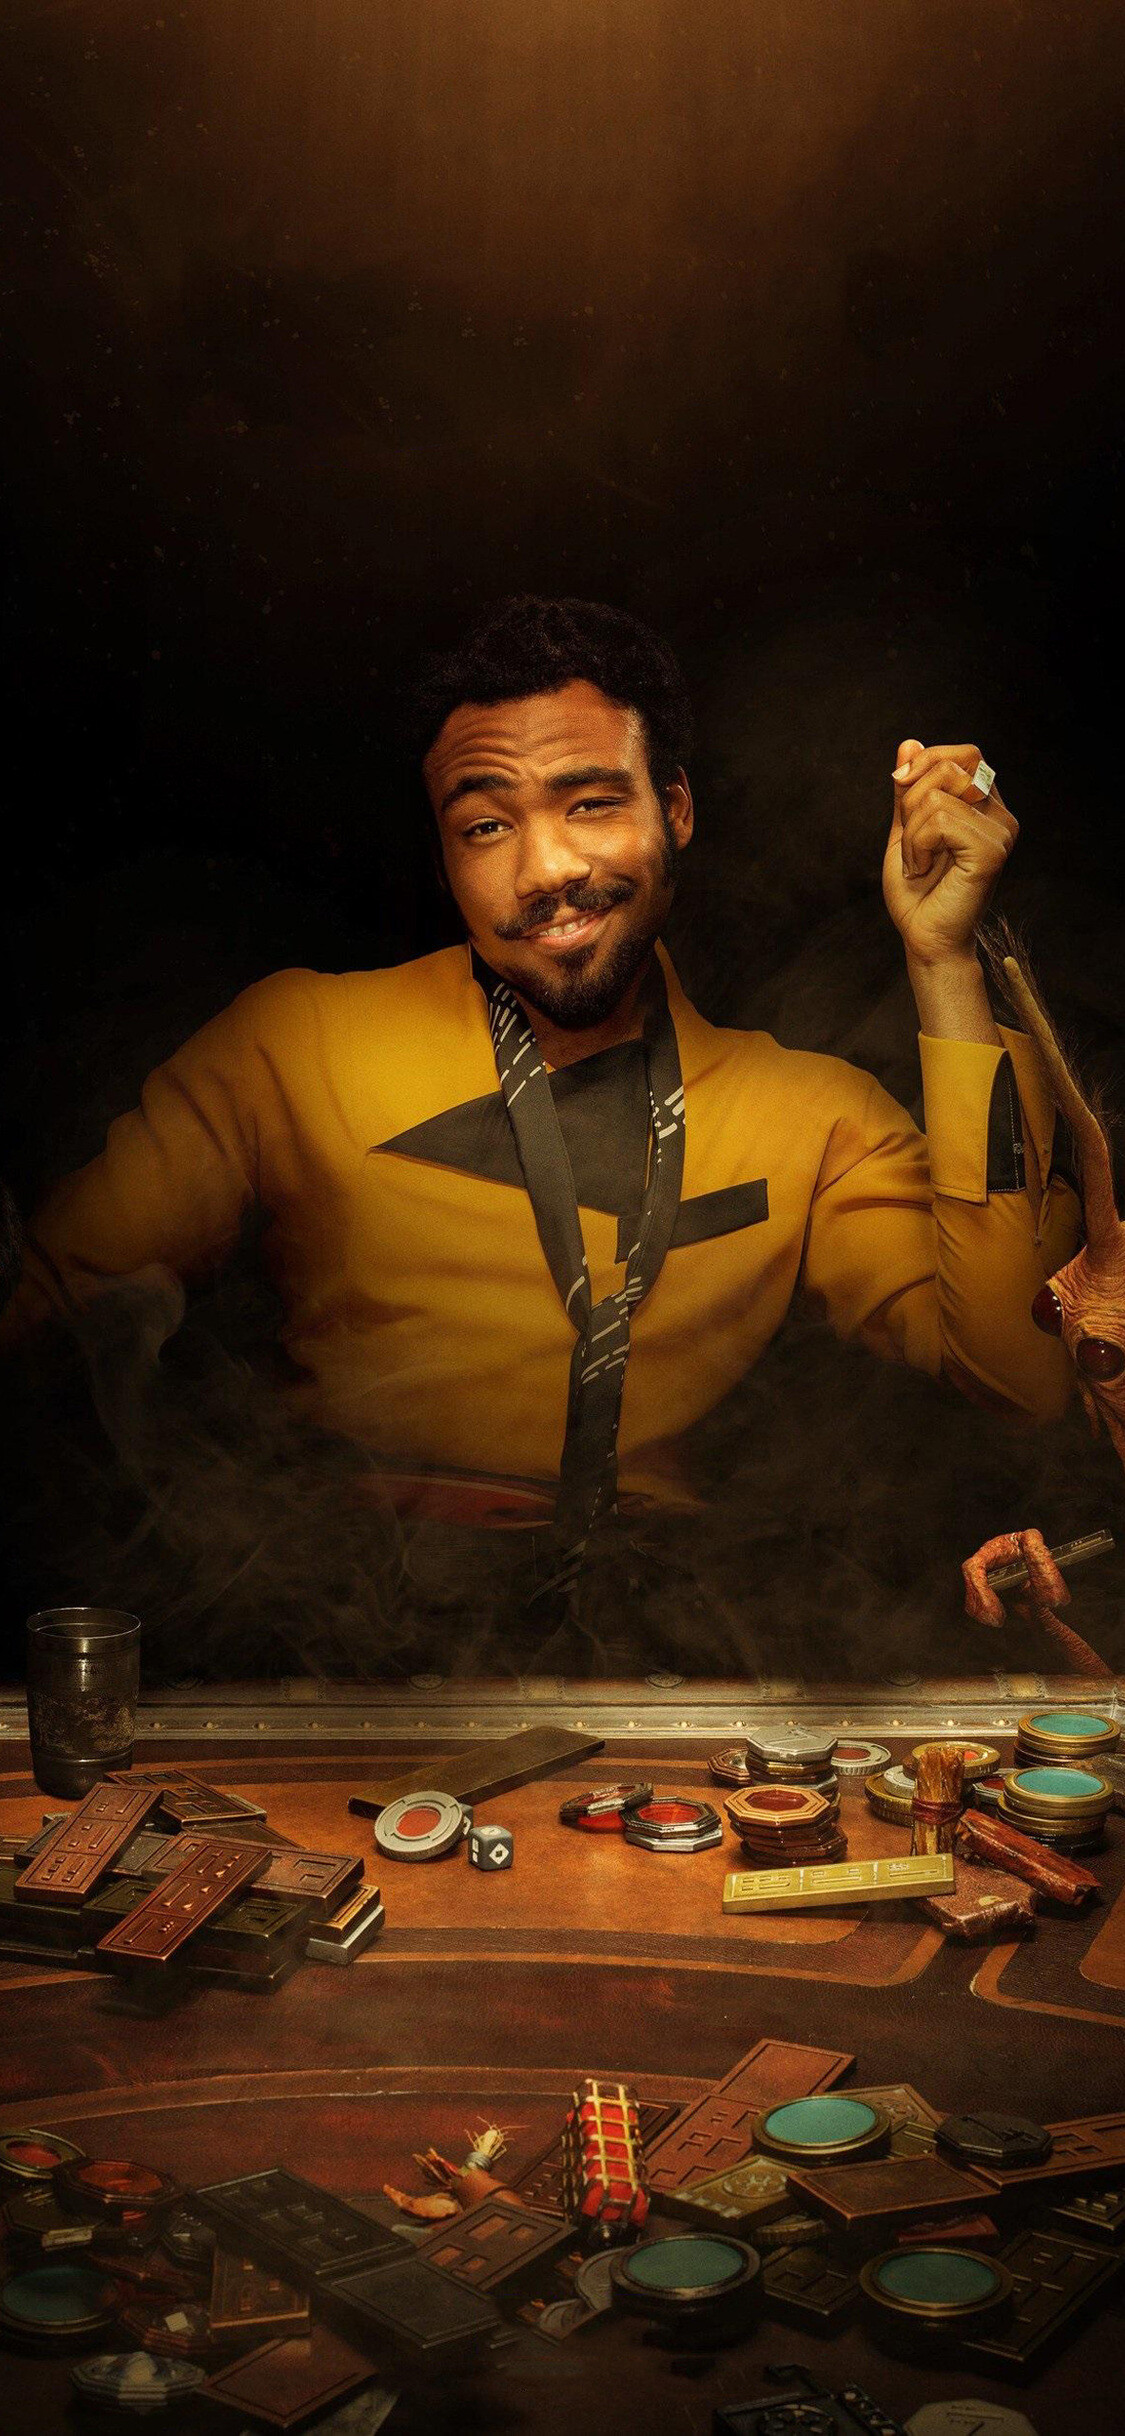 Donald Glover: Played Lando Calrissian in Solo: A Star Wars Story (2018). 1130x2440 HD Wallpaper.